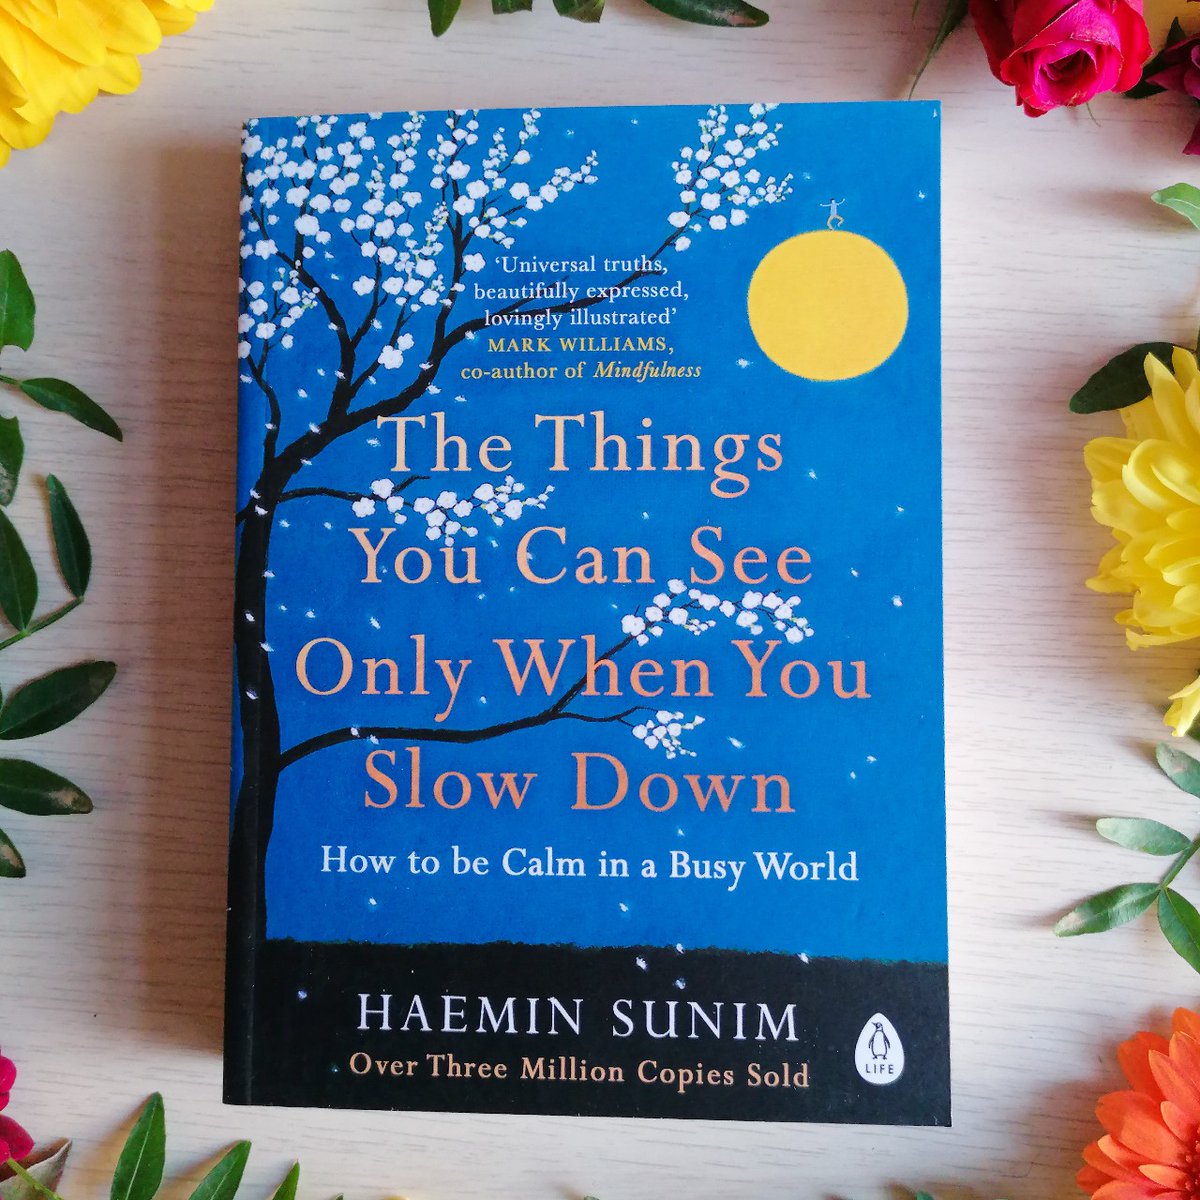 Diving into 'The Things You Can See Only When You Slow Down' by Haemin Sunim has been a serene escape from the daily hustle. 🌼 In the latest edition of #WorkingOutLoud I’m sharing my top 10+1 quotes from this book and I want love to know - which one speaks to you? Let's…